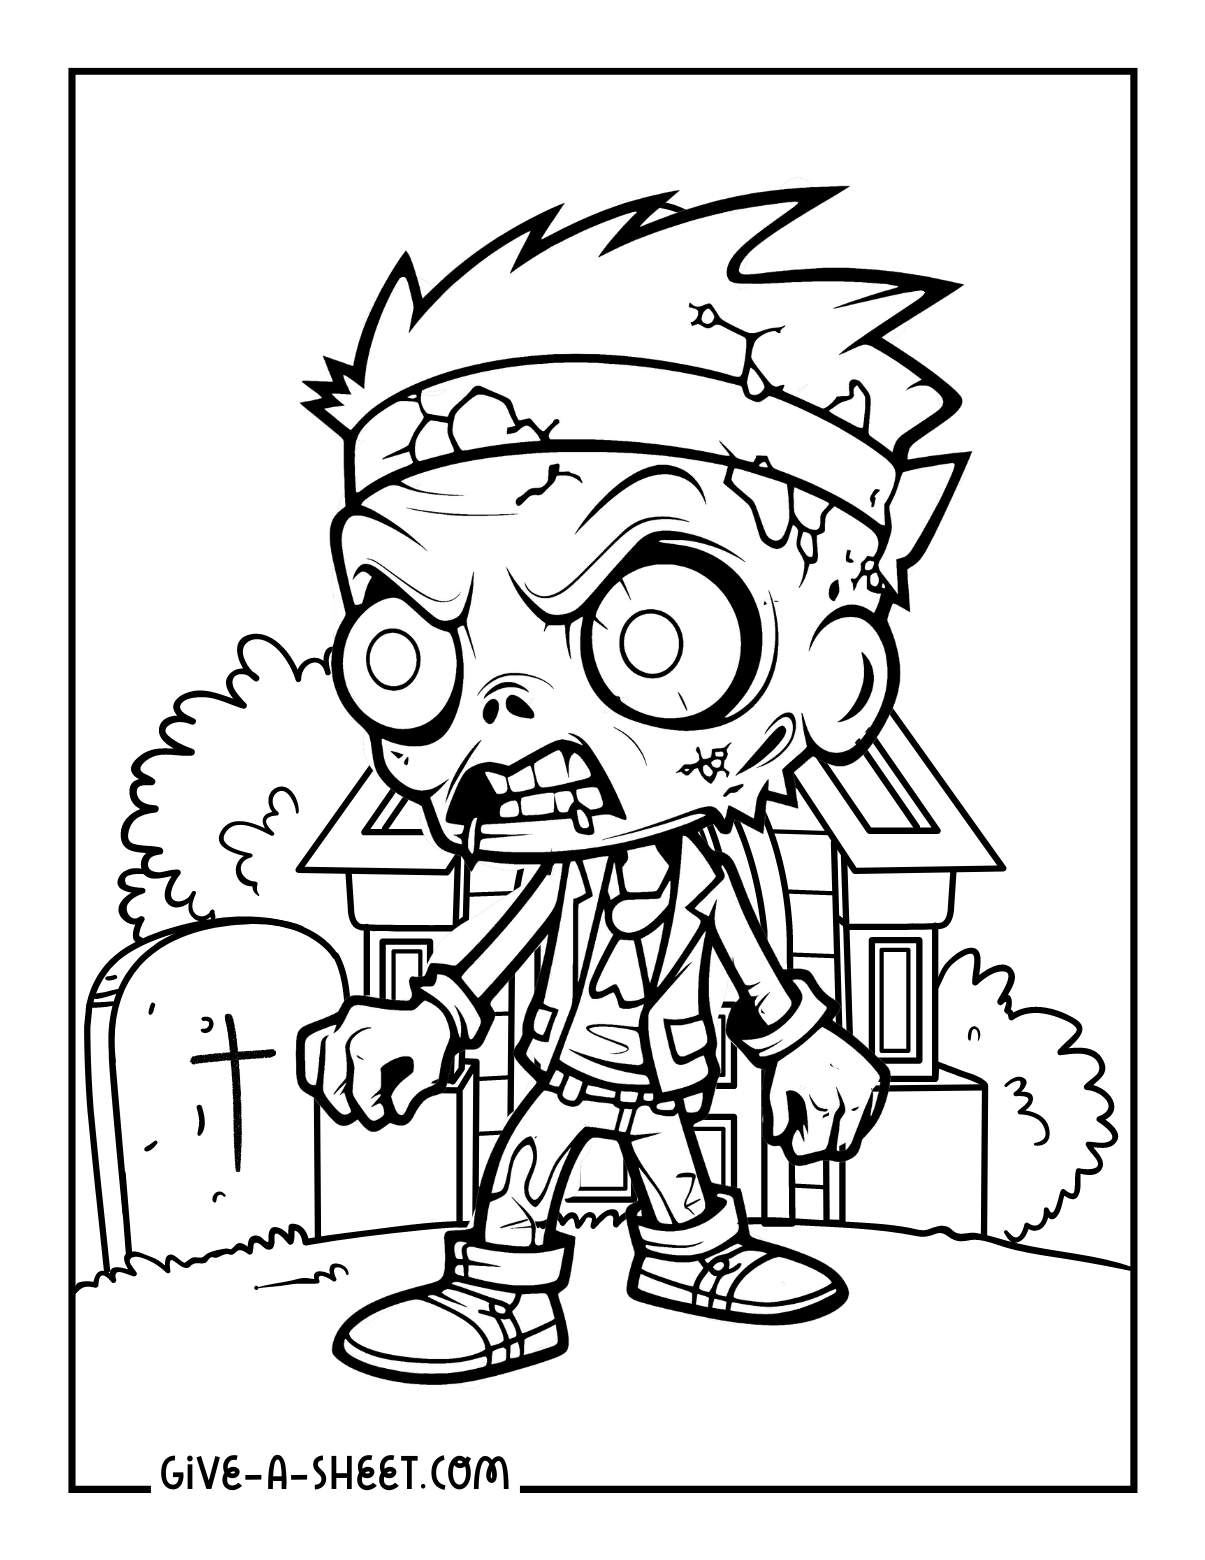 Zombie creatures coloring page for kids.